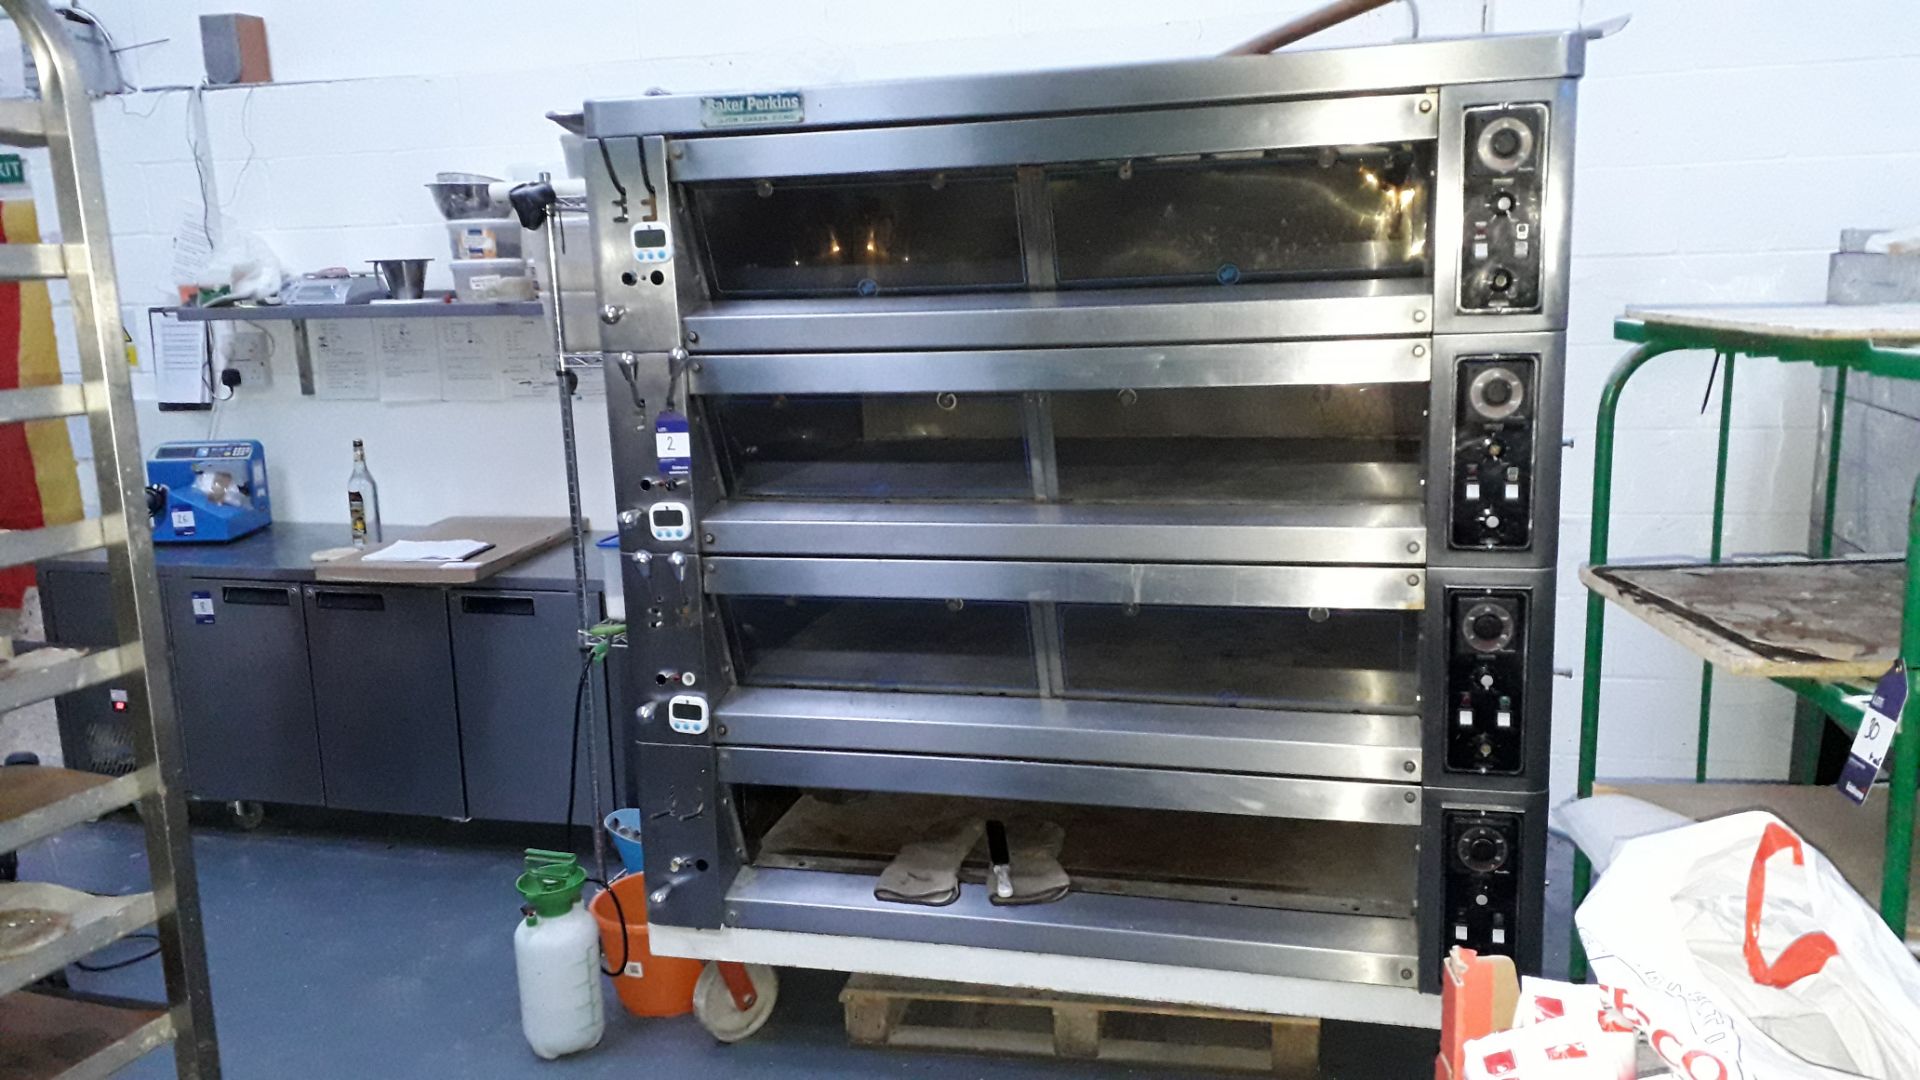 Pavailler MC40 4 Deck Electric Oven 410v - Image 2 of 3